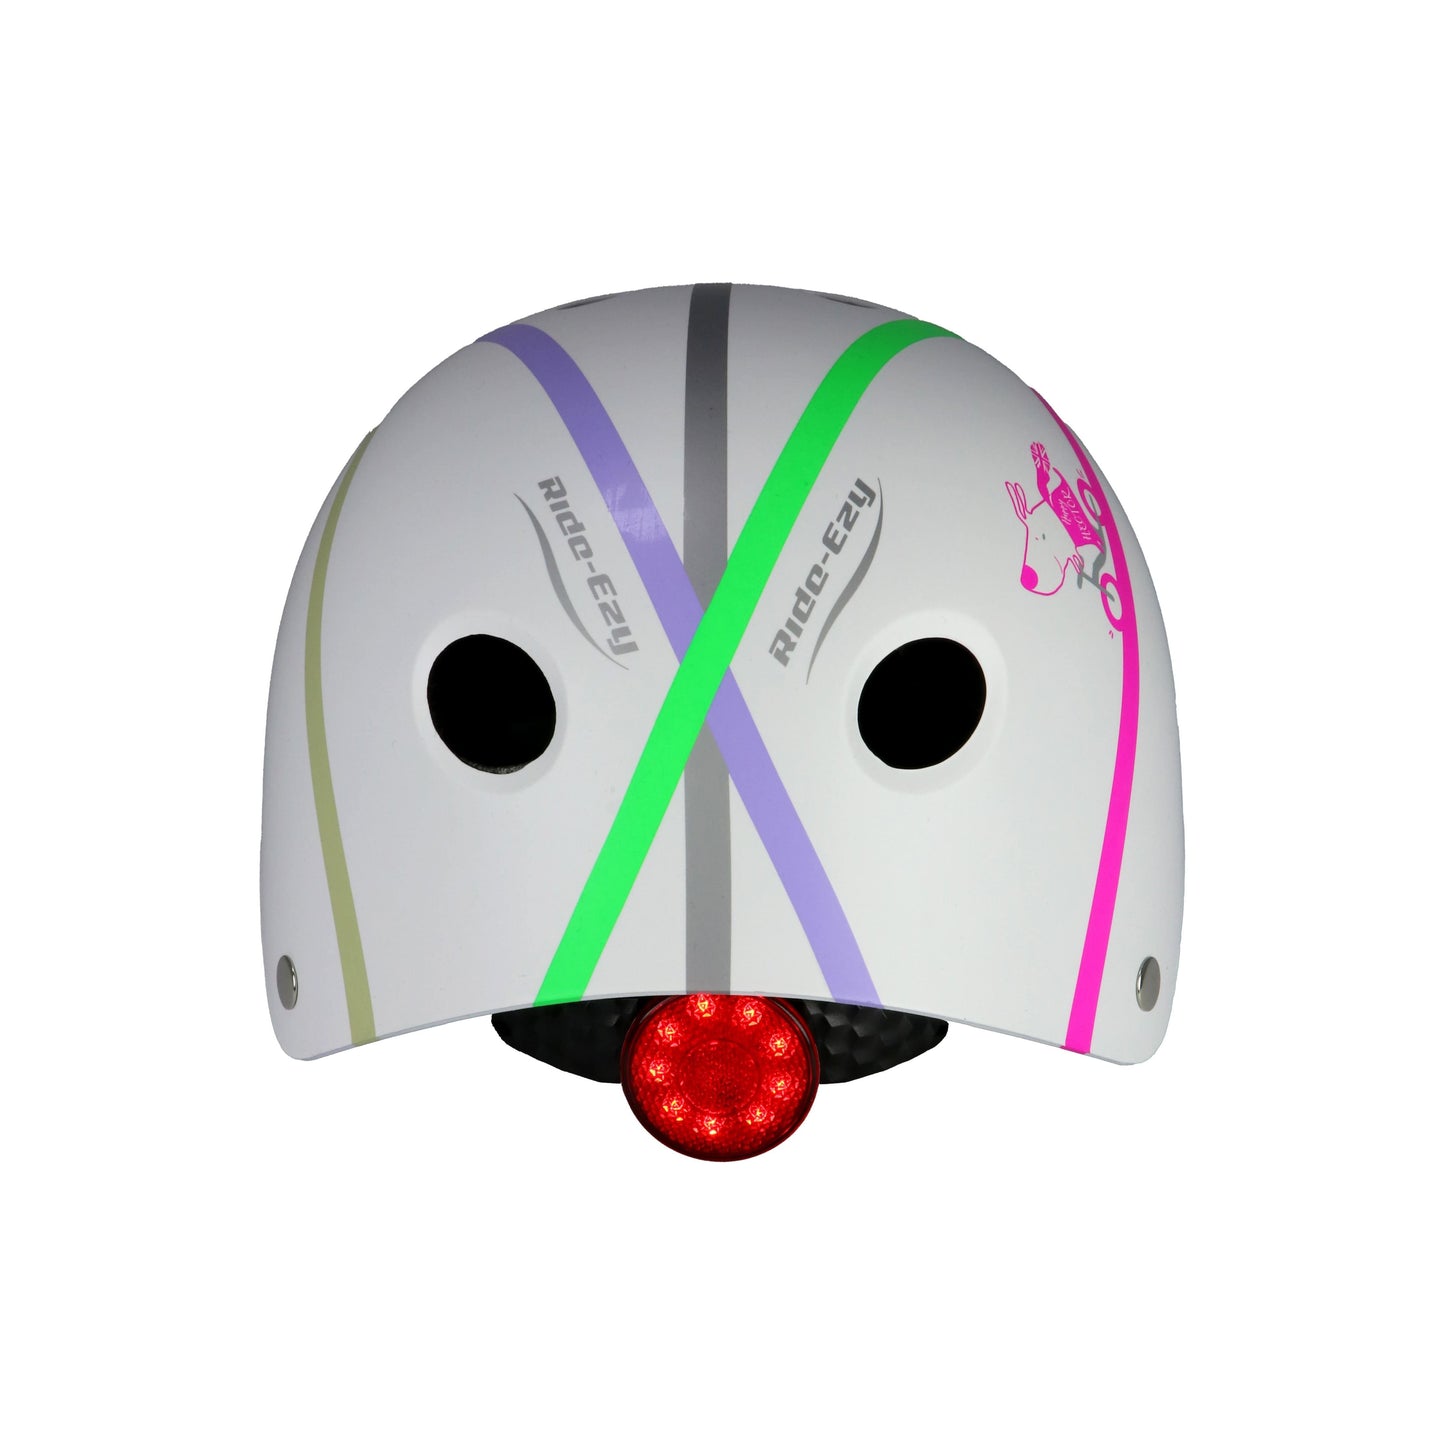 Ride-Ezy Hector 54-57cms Kids Helmet - White rear with safety light